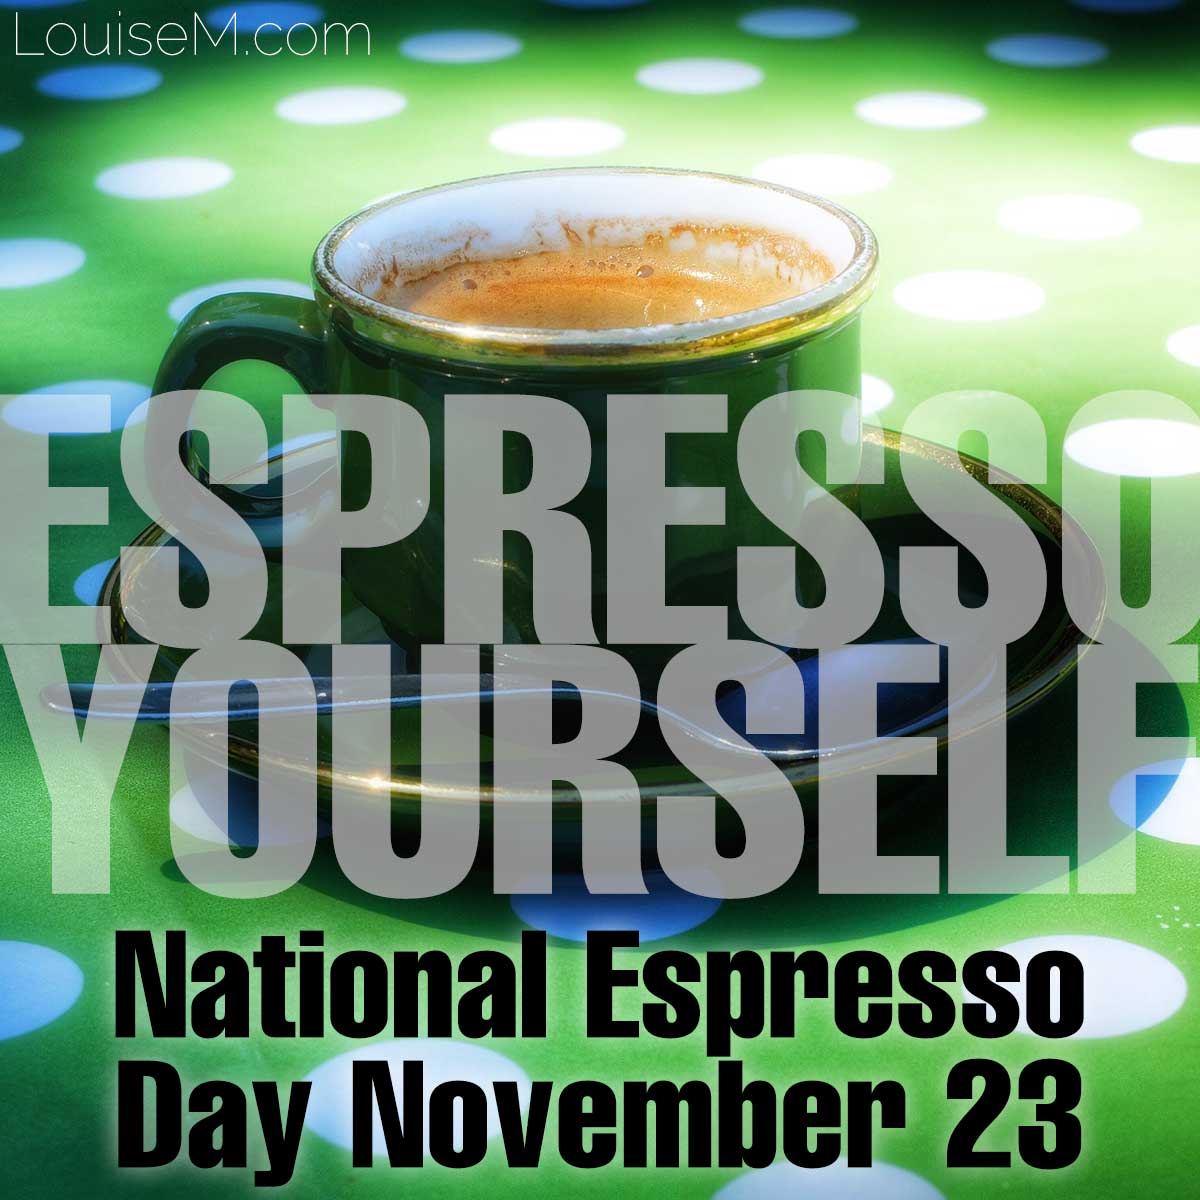 cup of espresso on green polka dot table cloth days national espresso day is november 23.